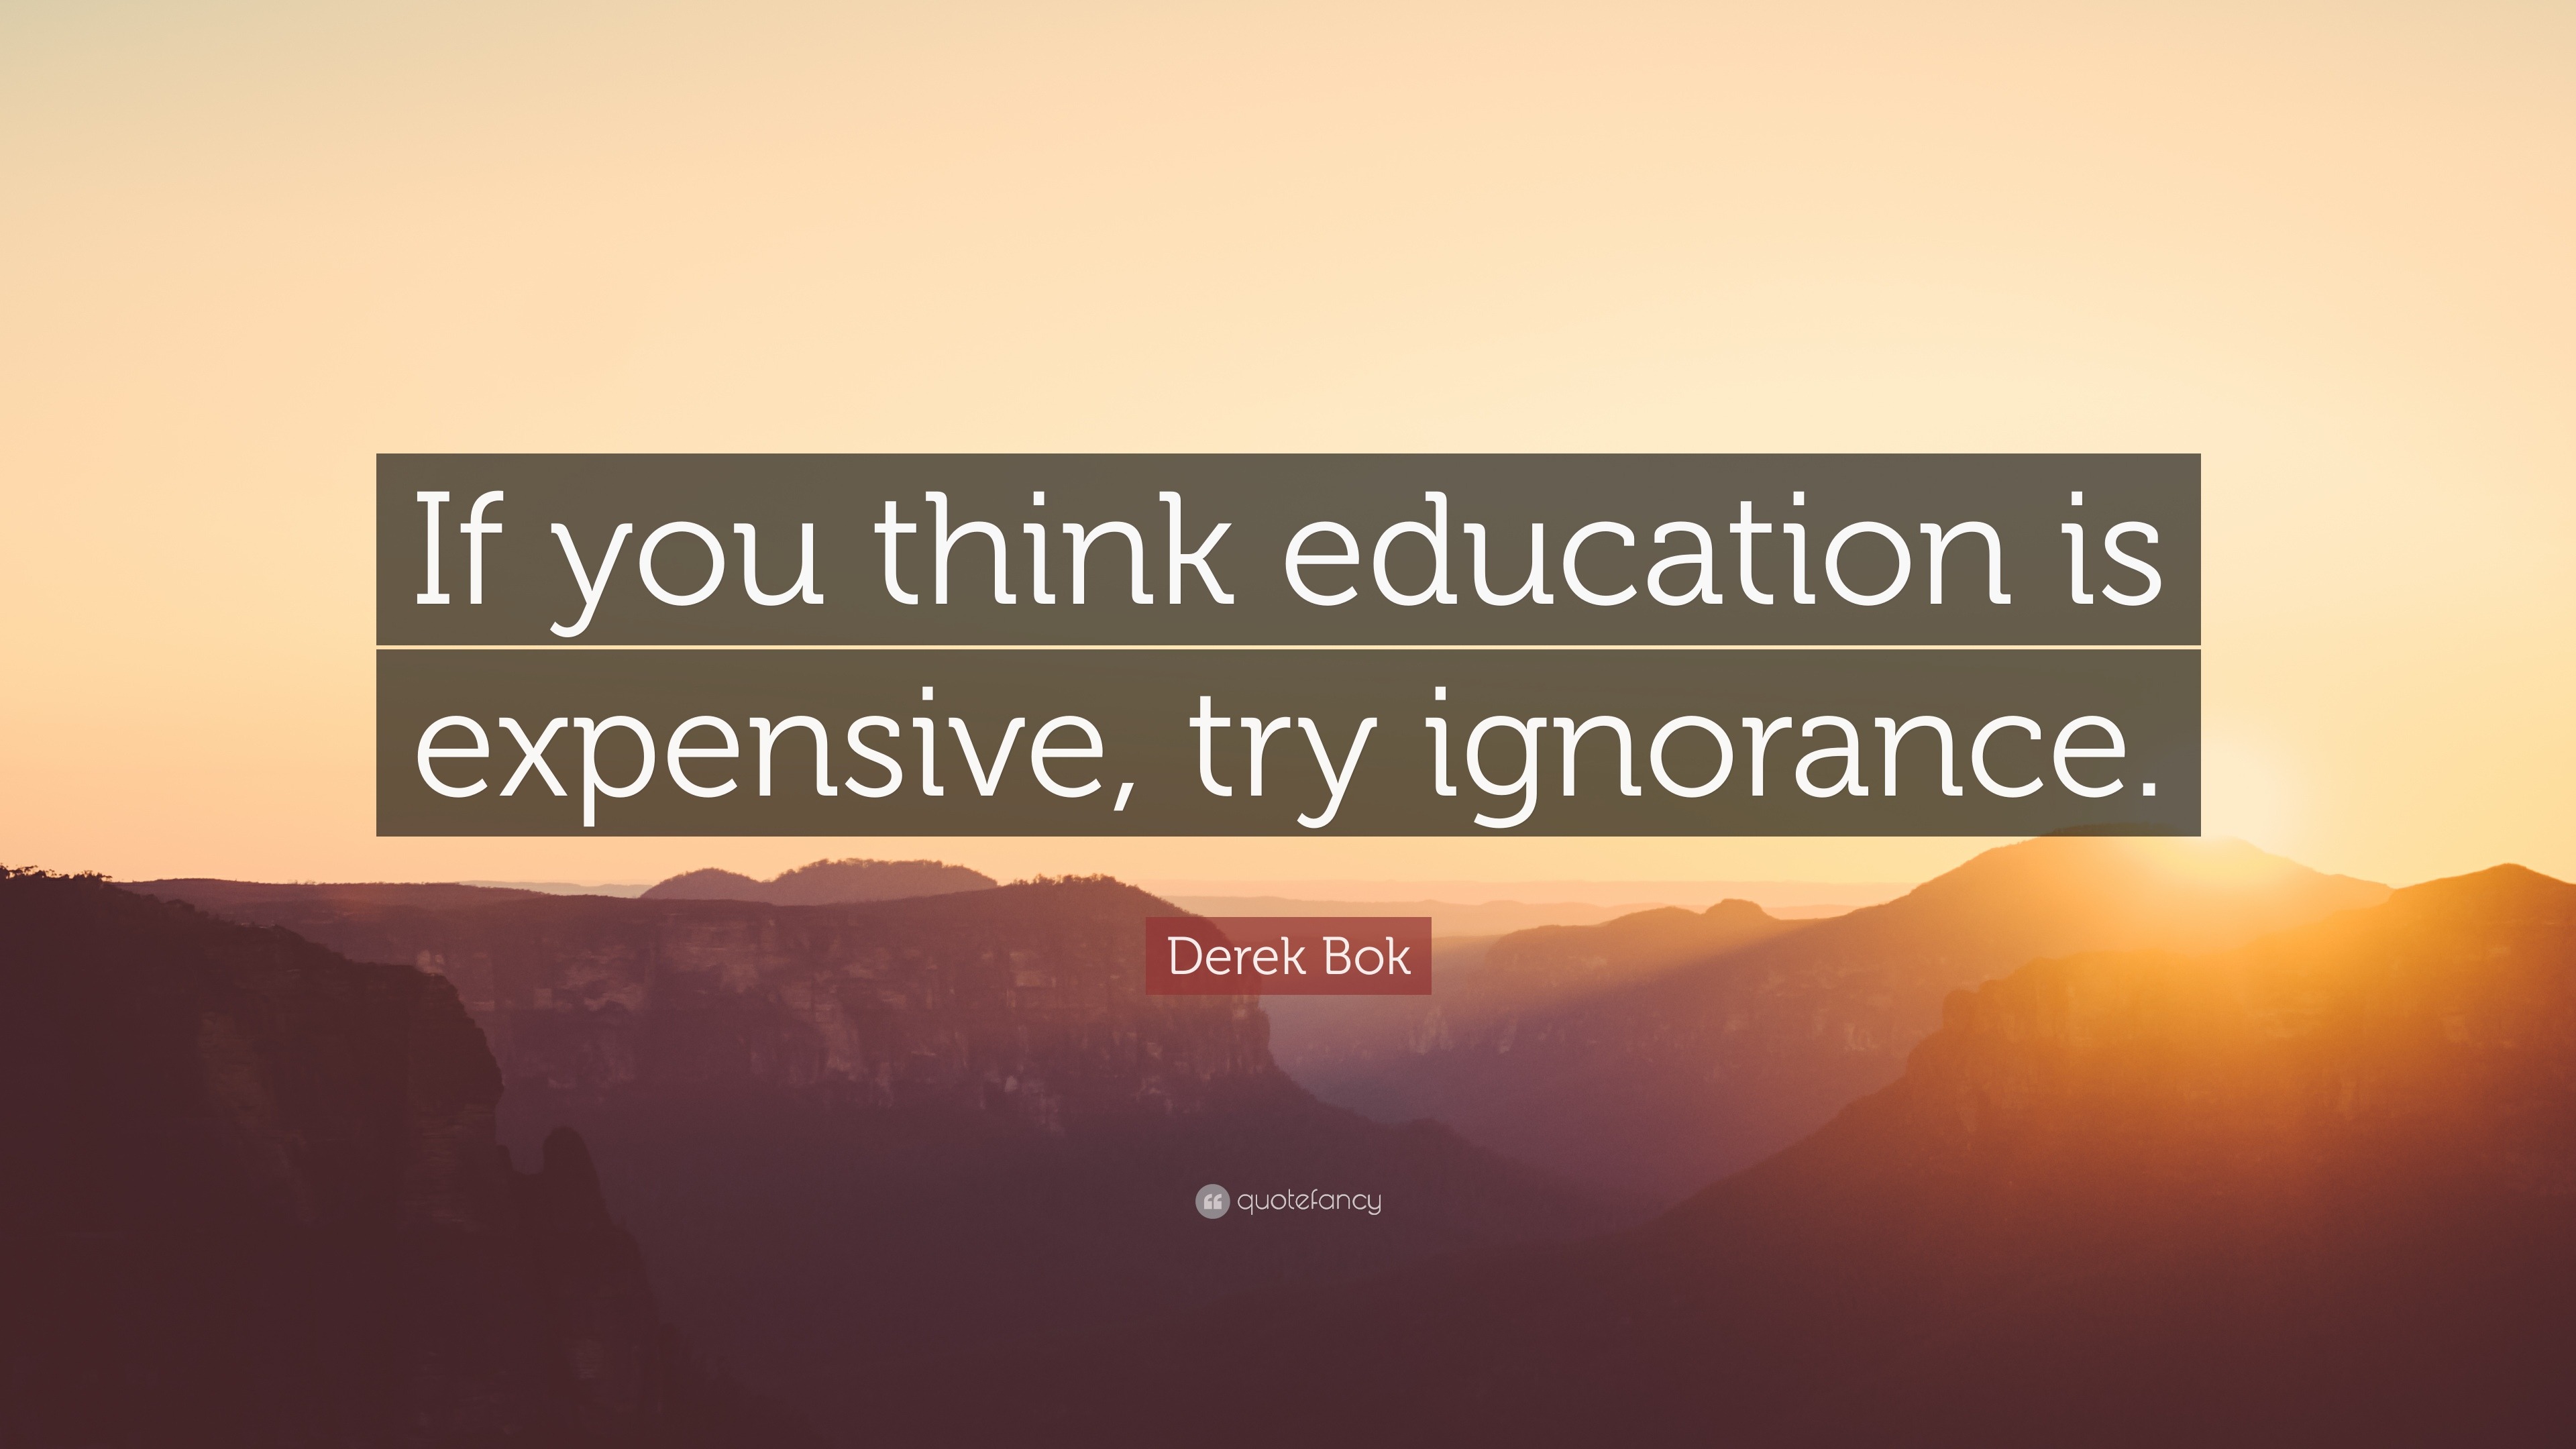 meaning of if you think education is expensive